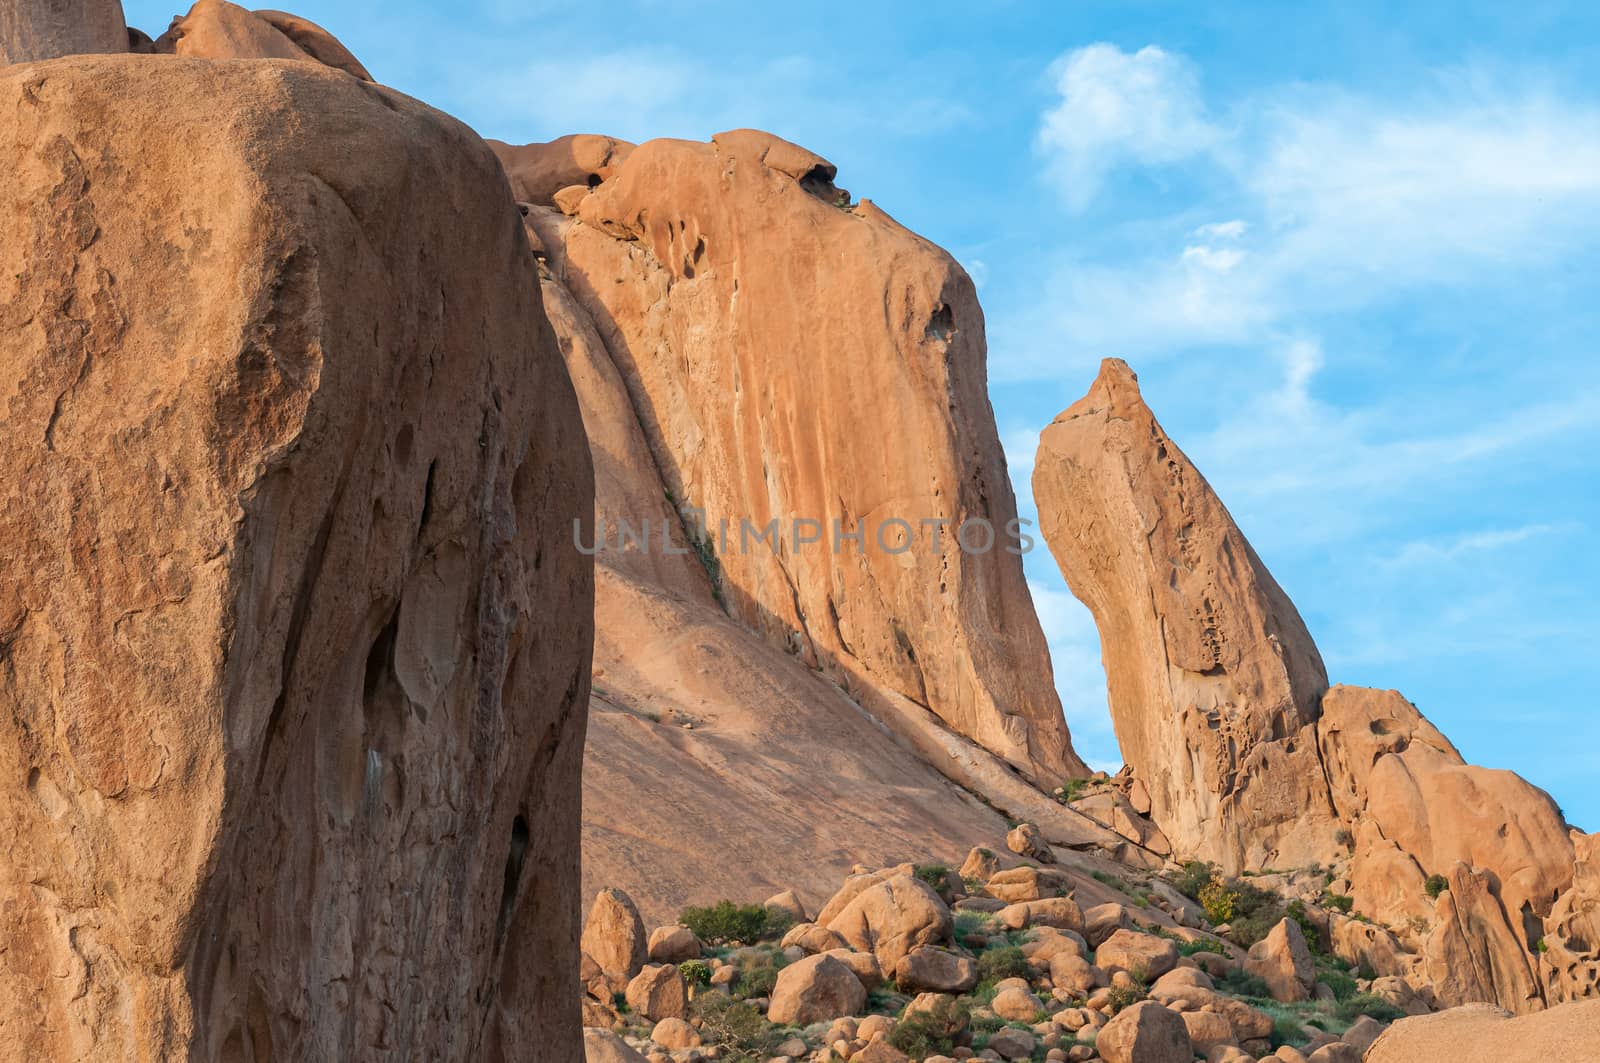 Granite needle and rock formation resembling baboon face at Spit by dpreezg